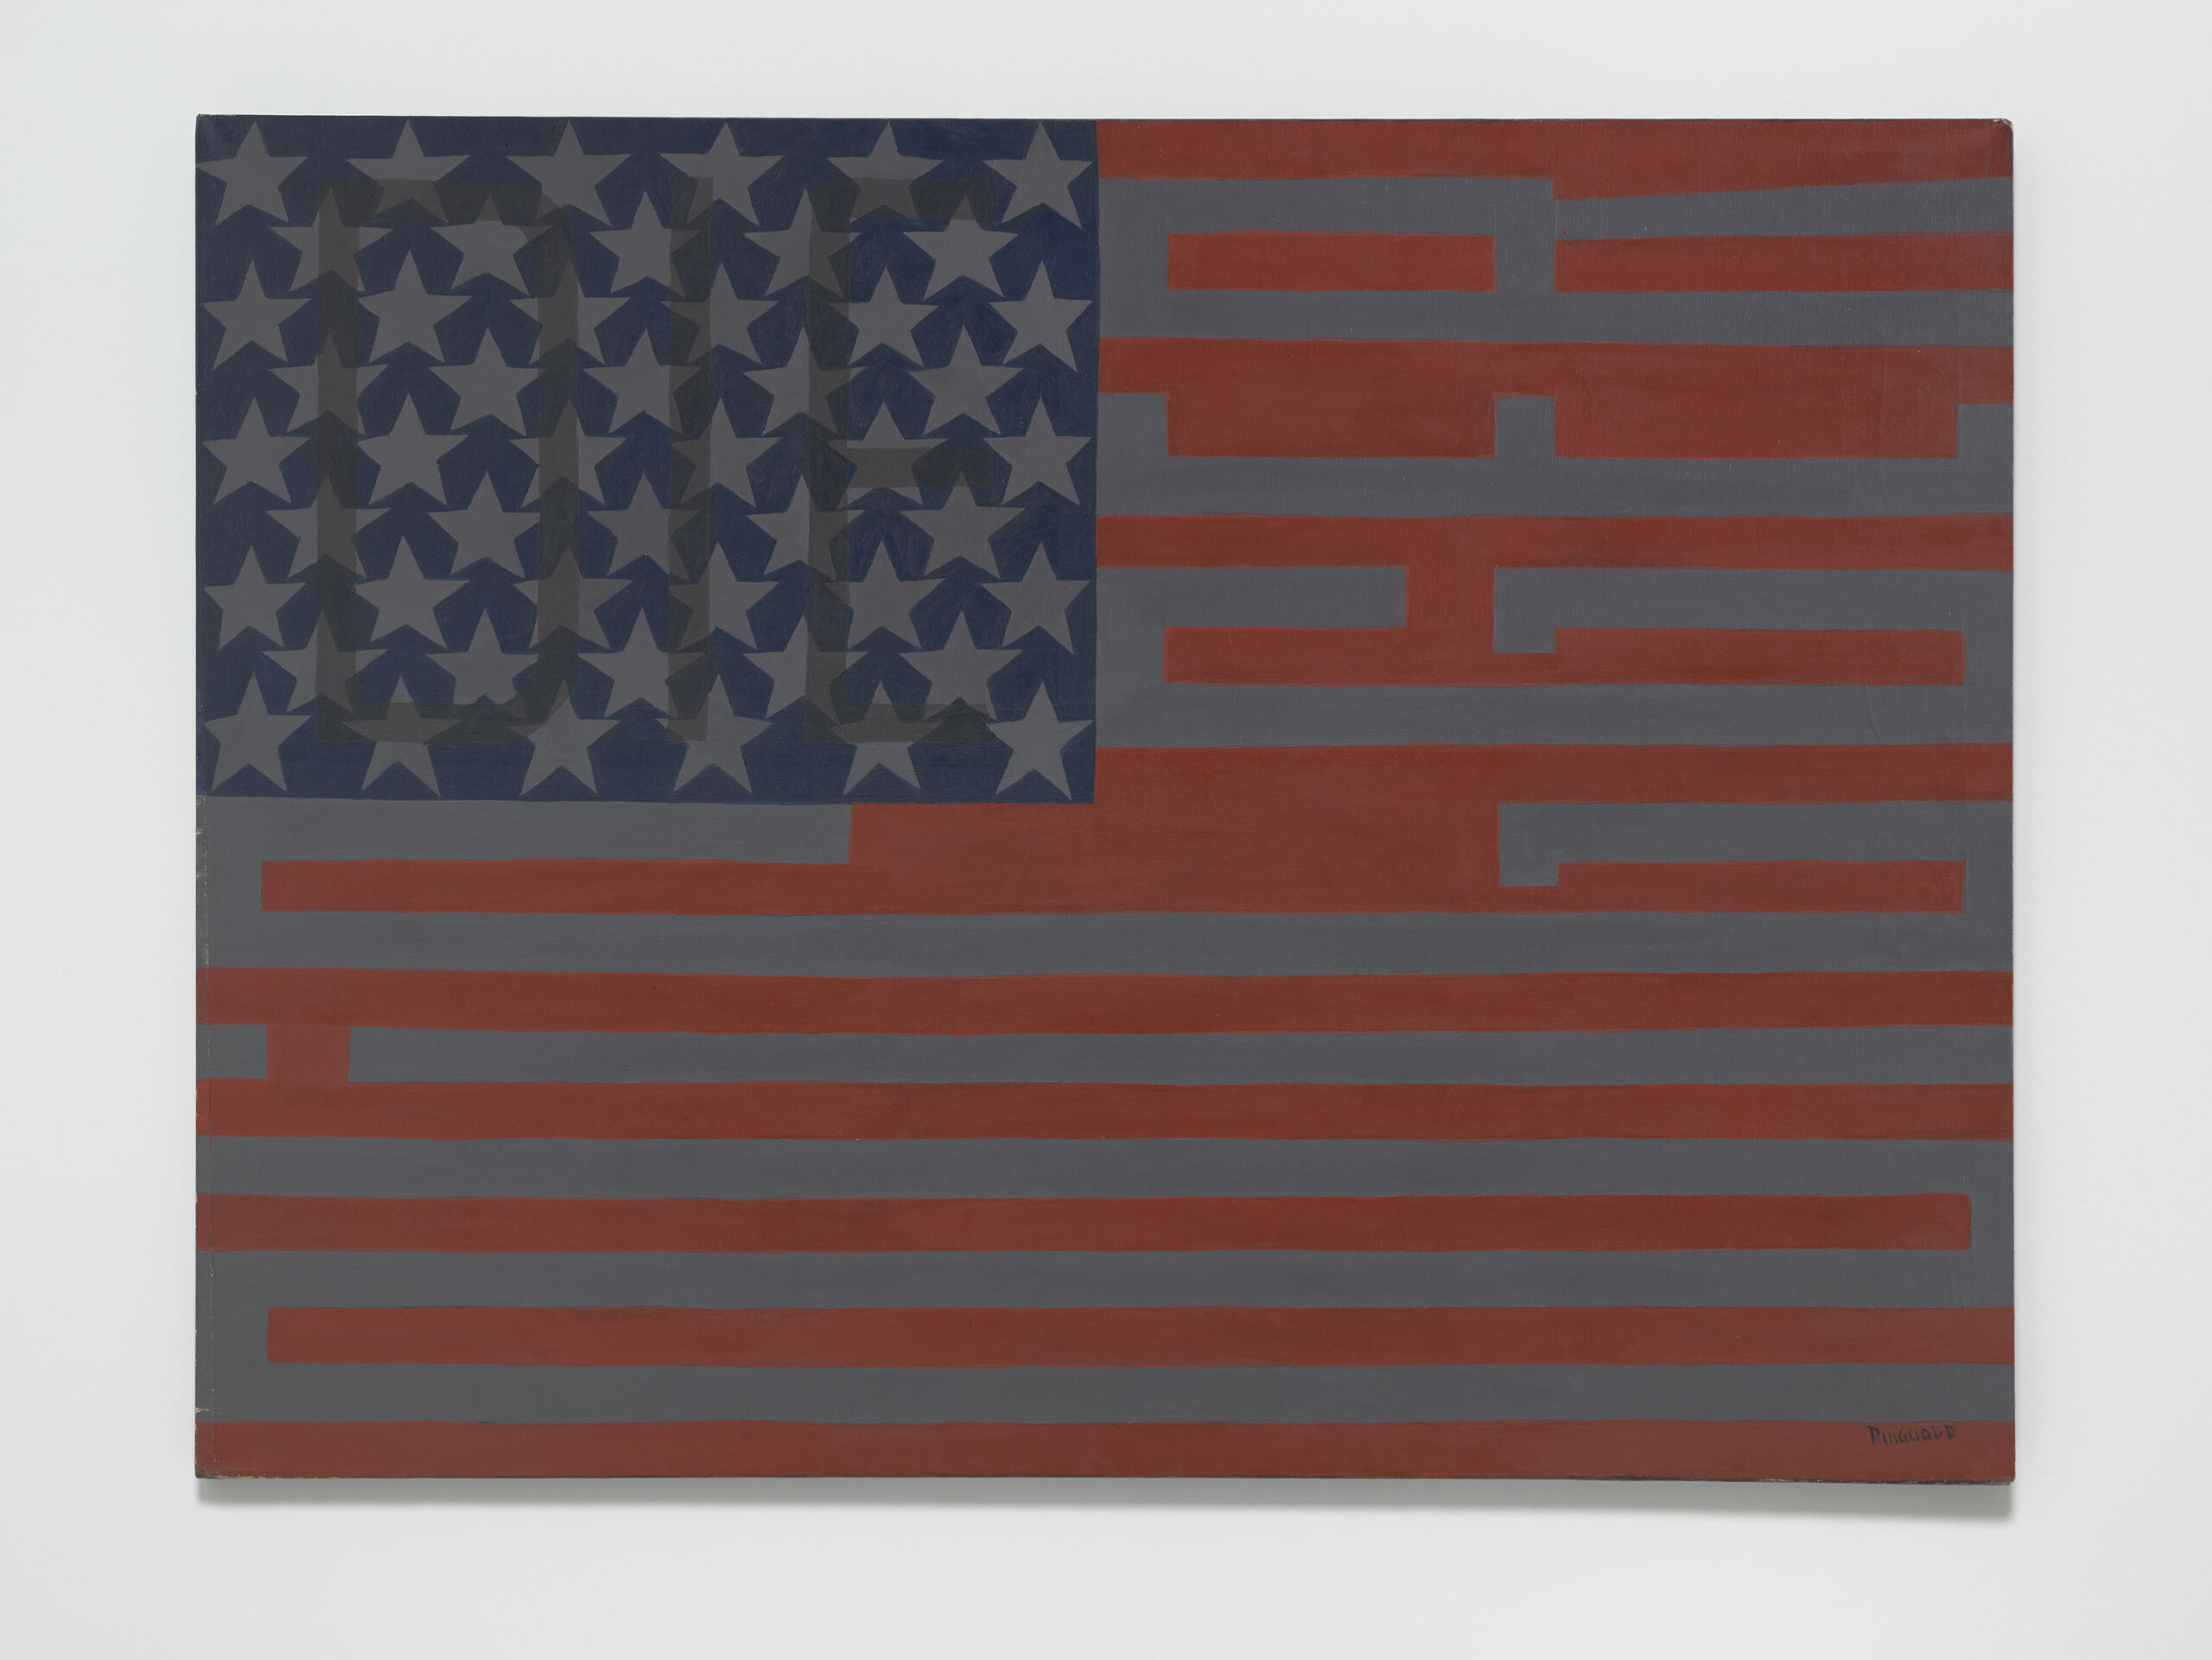 A photo of a painting called "Black Light Series #10: Flag for the Moon" by Faith Ringgold